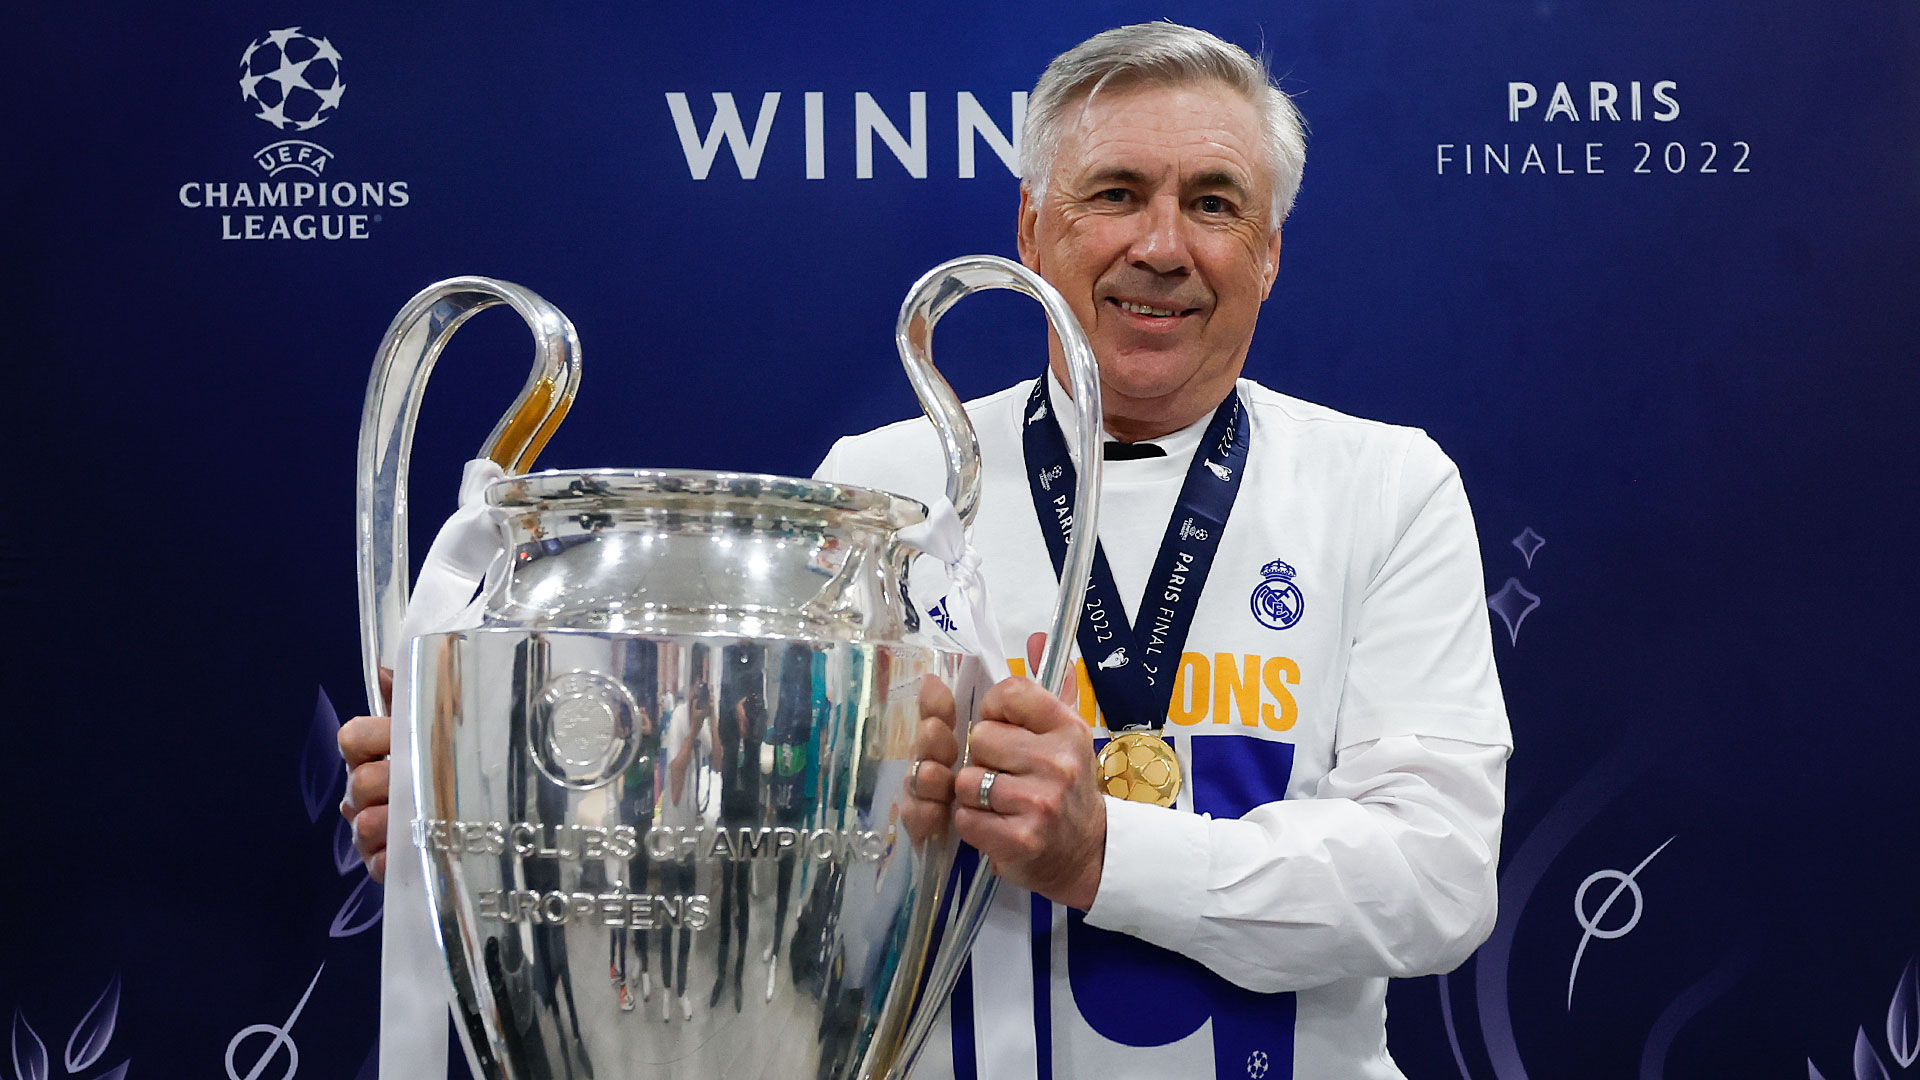 Ancelotti will coach his 200th Champions League game against Manchester City